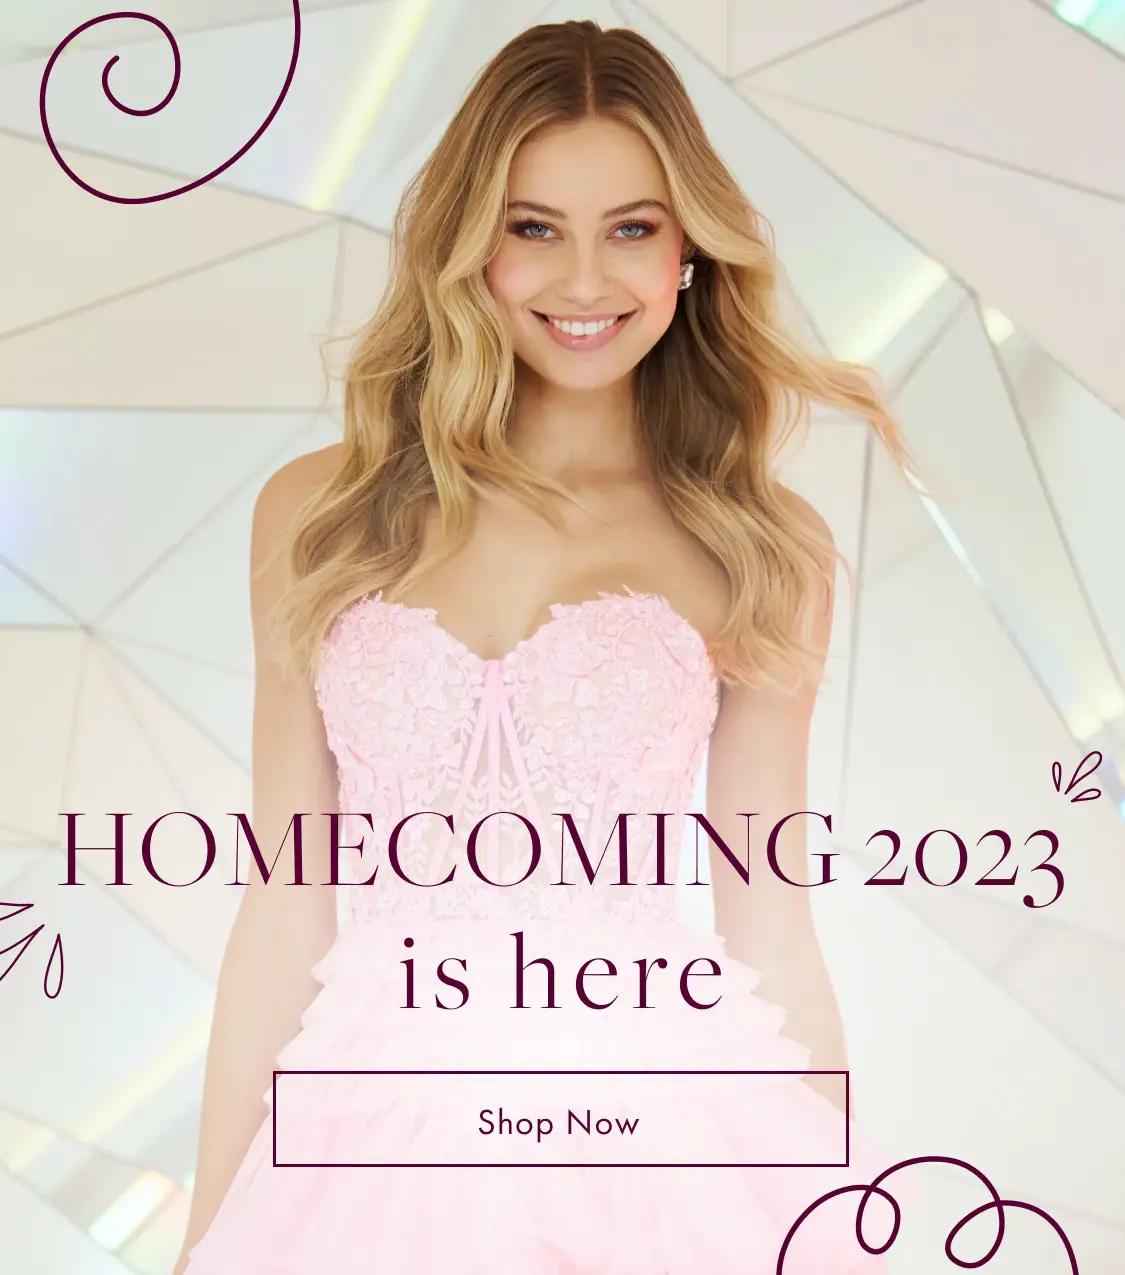 Homecoming 2023 collection Banner for Mobile